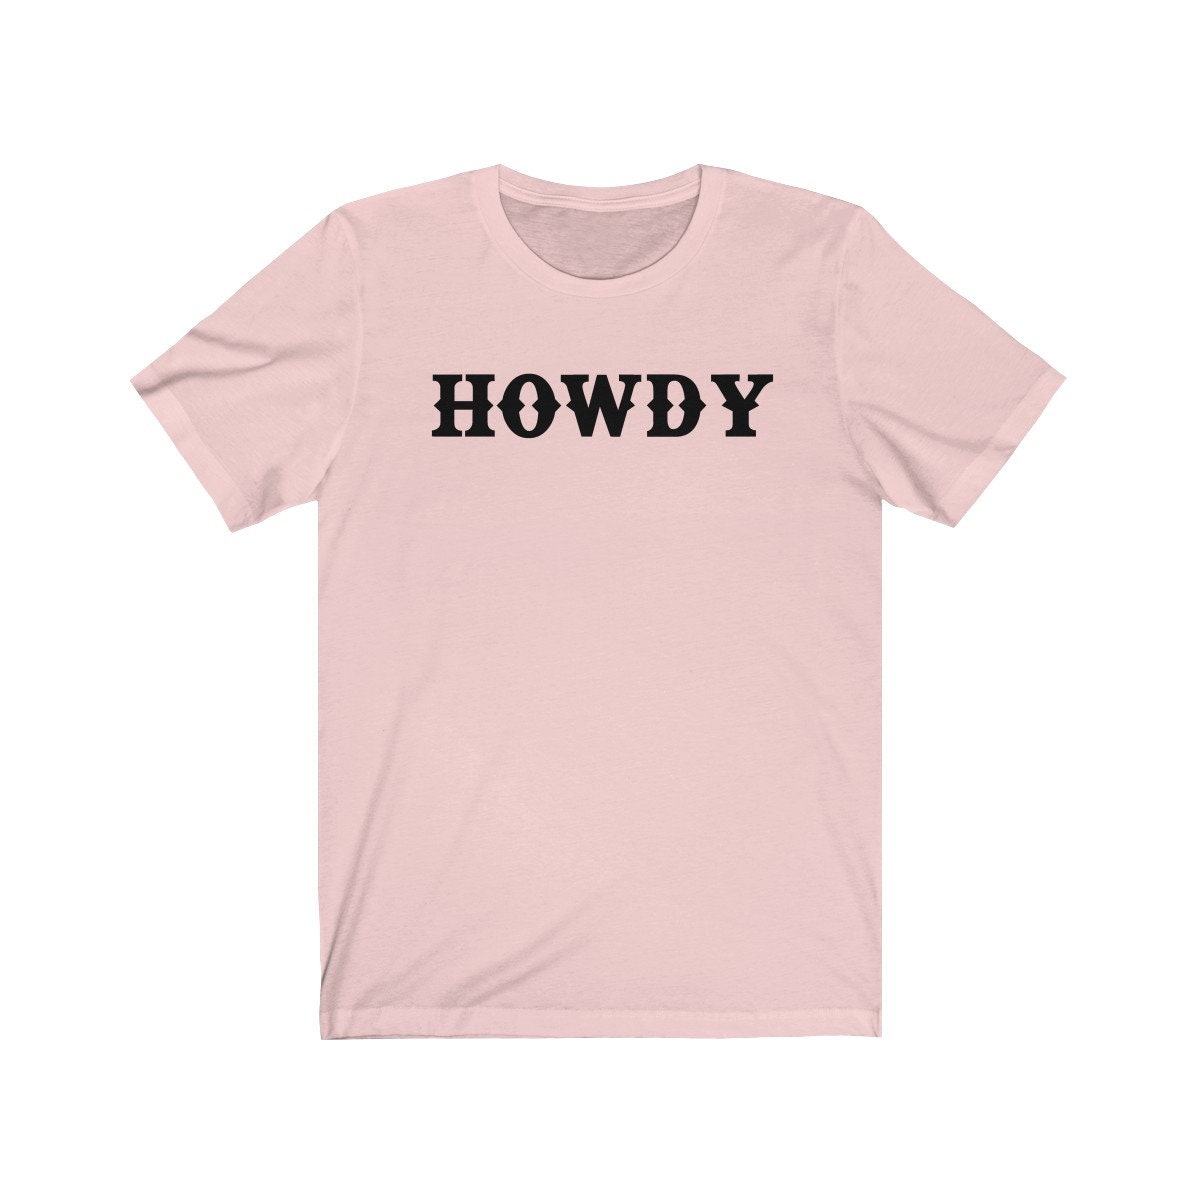 Howdy Shirt Howdy Gift Country Shirt Country Gift Shirt | Etsy